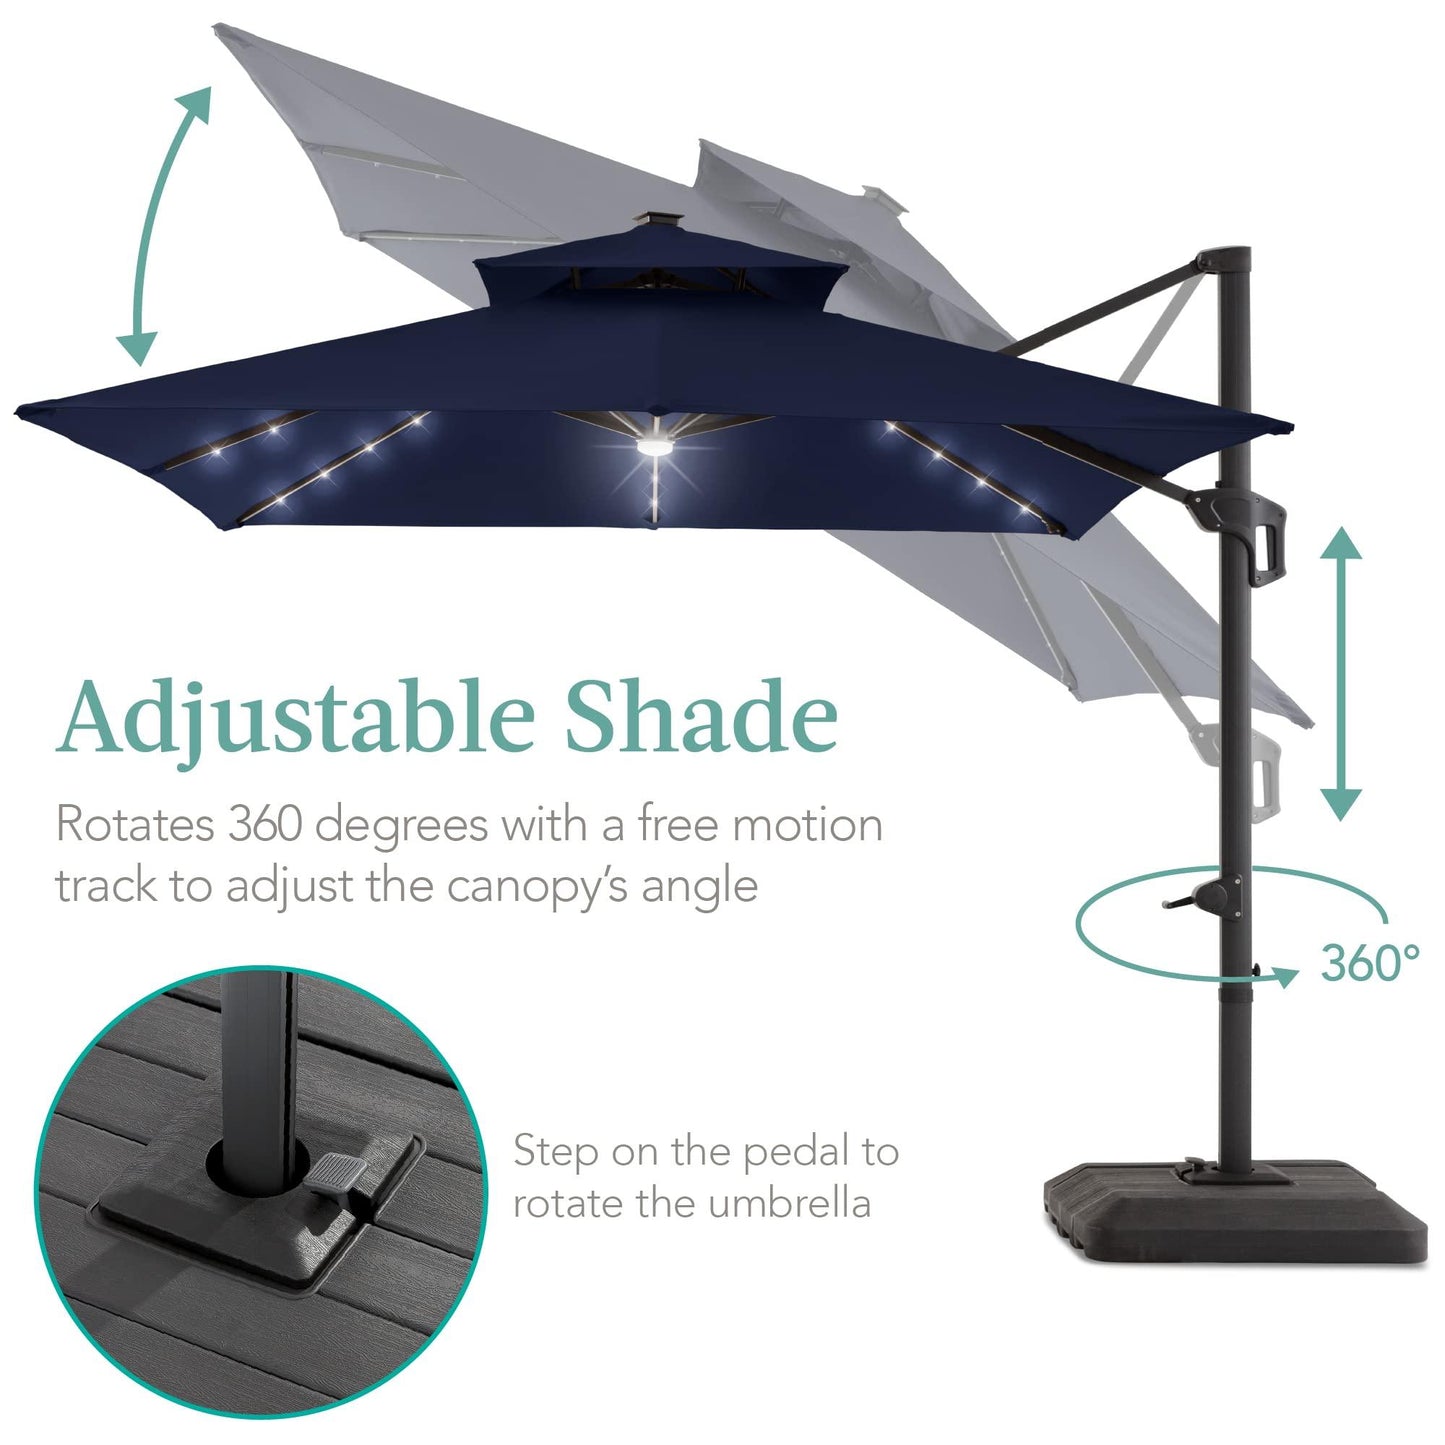 Best Choice Products 10x10ft 2-Tier Square Cantilever Patio Umbrella with Solar LED Lights, Offset Hanging Outdoor Sun Shade for Backyard w/Included Fillable Base, 360 Rotation - Navy Blue - CookCave